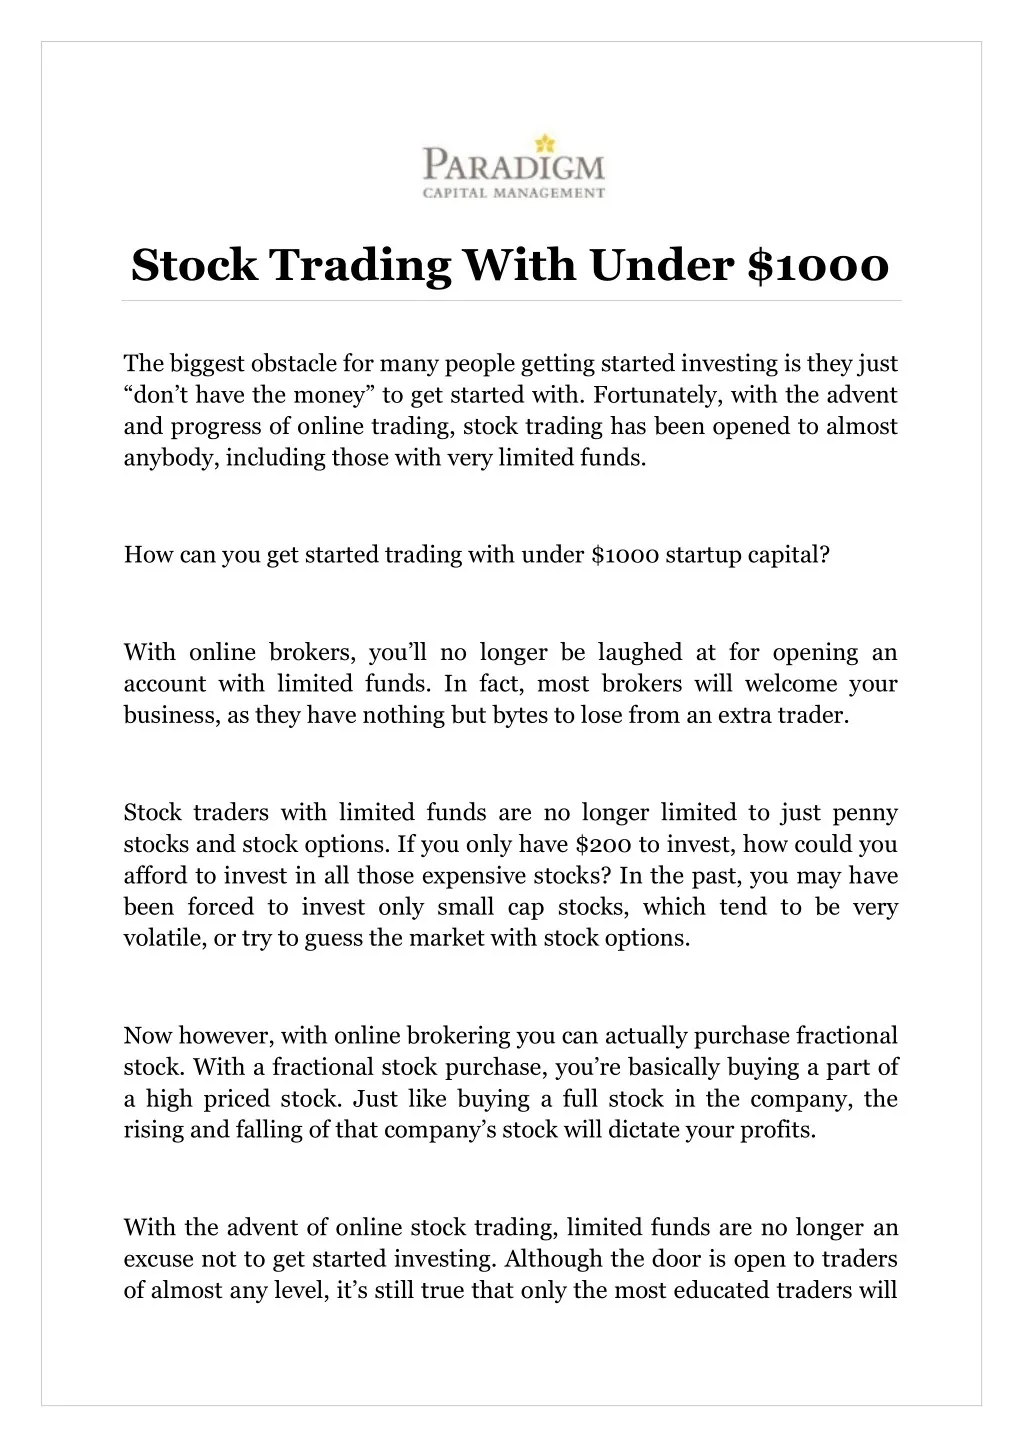 stock trading with under 1000